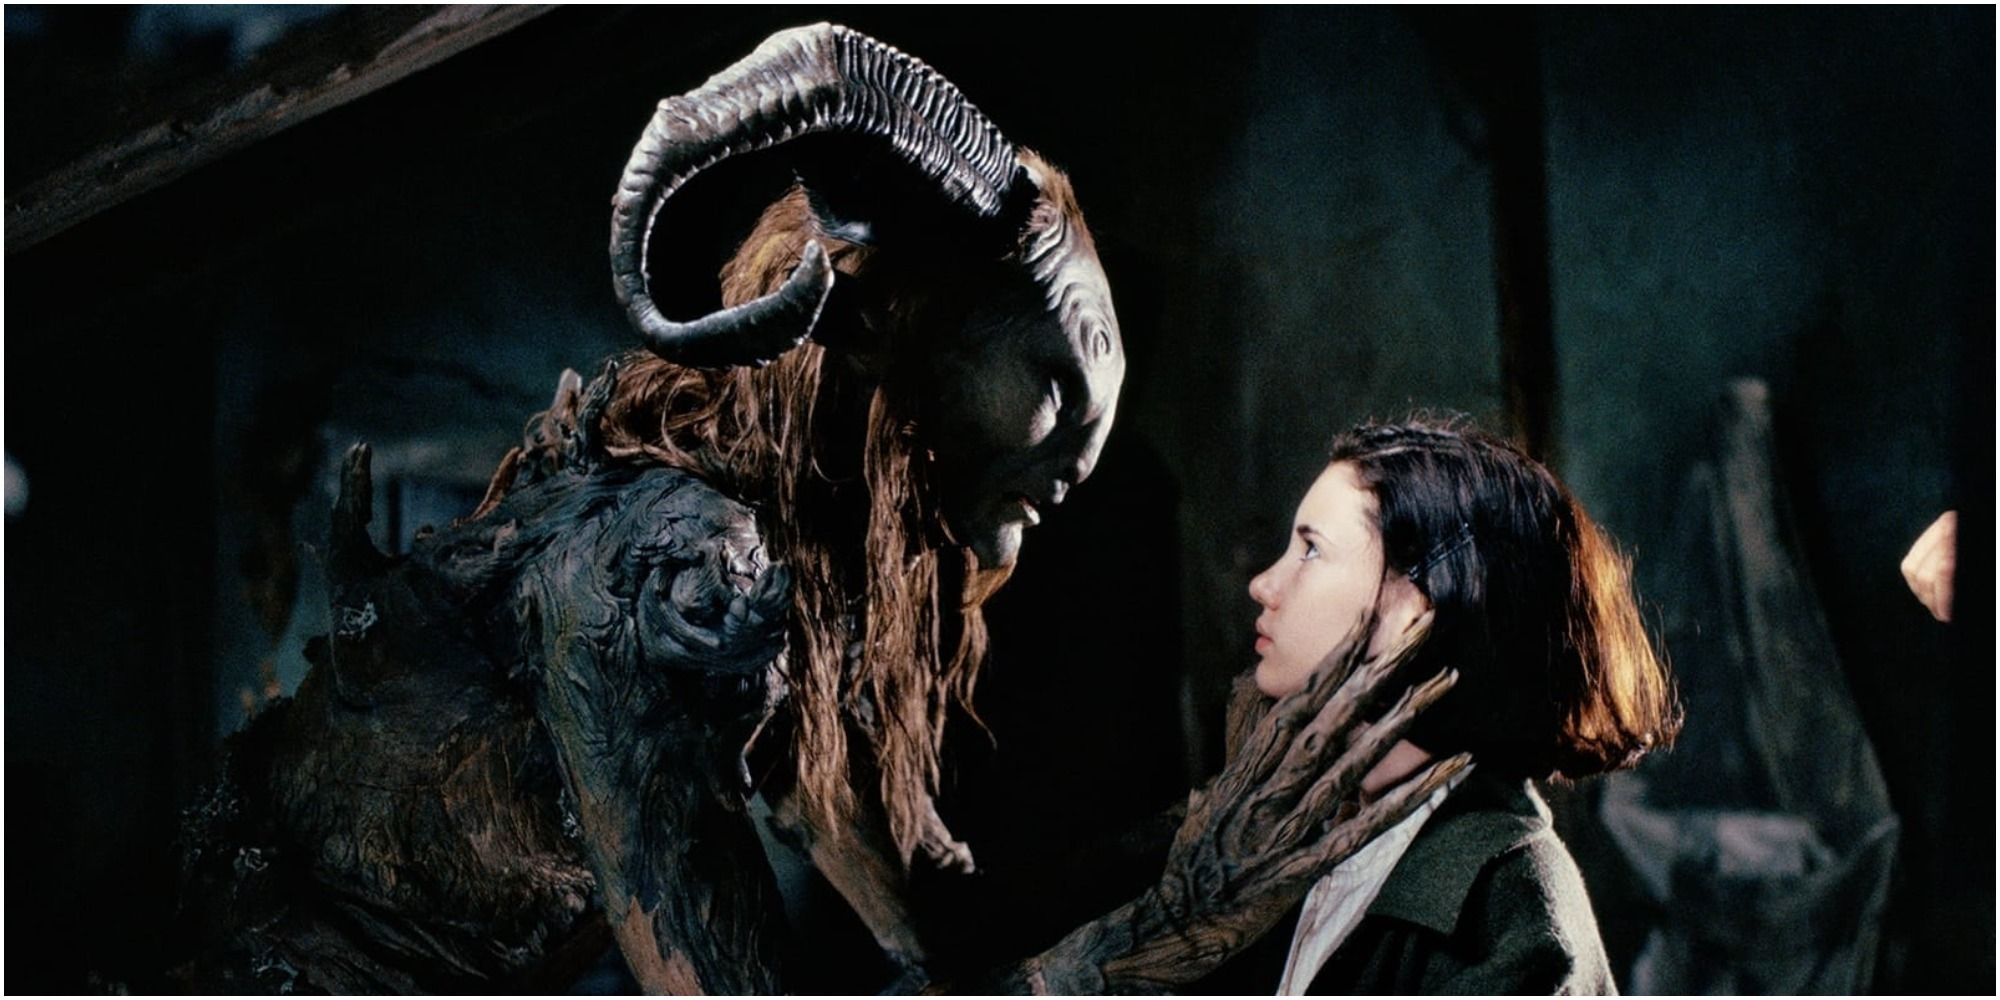 Guillermo Del Toros Pans Labyrinth 10 Most Memorable Quotes